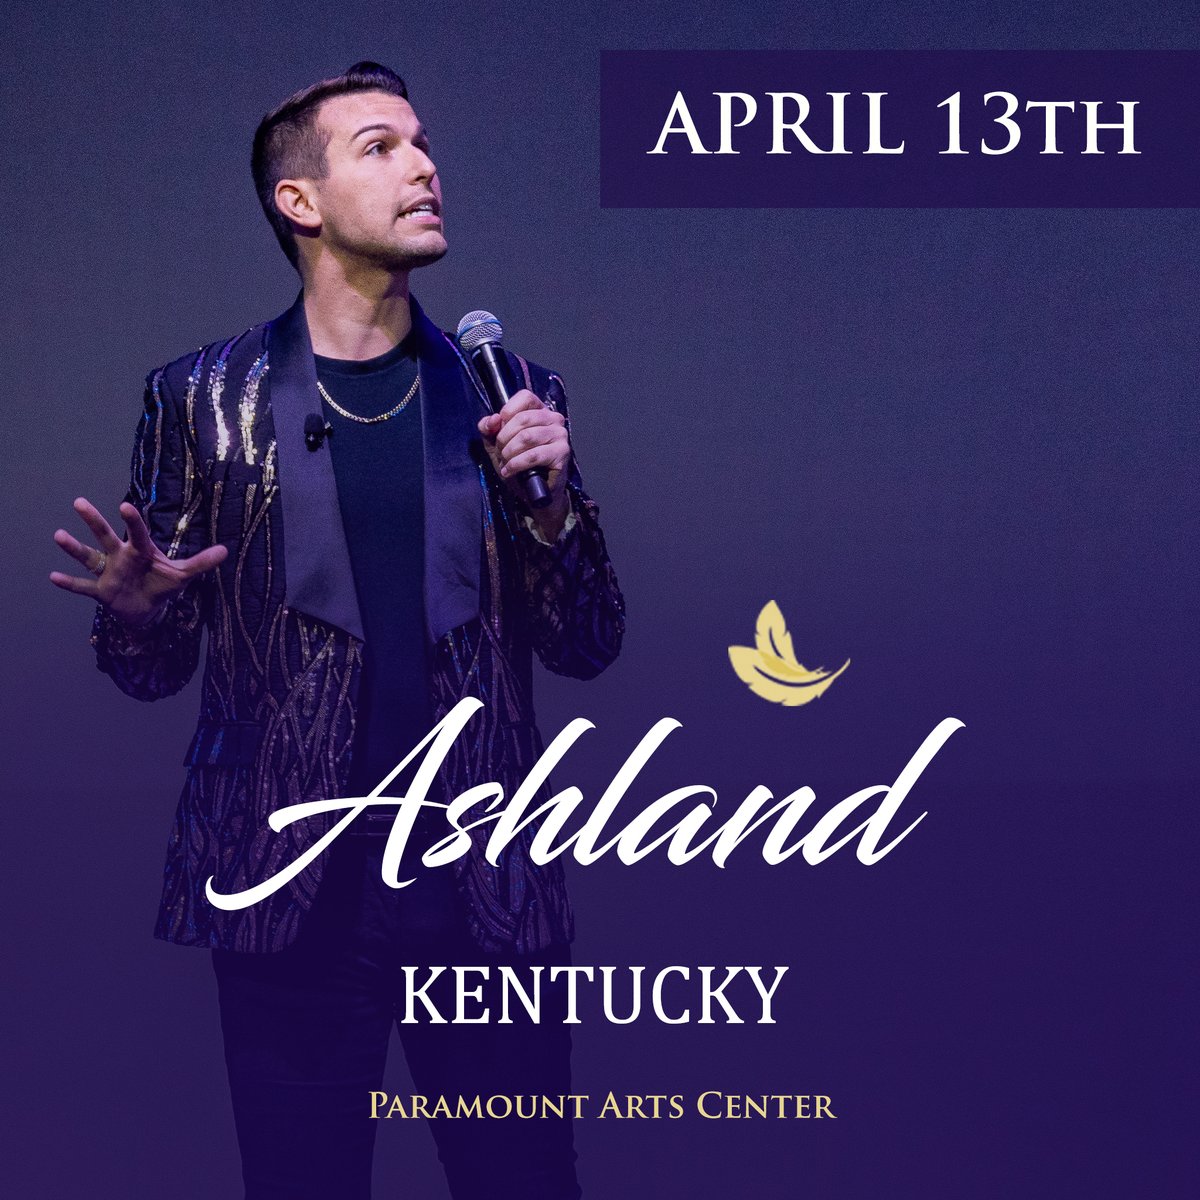 🌟 Ashland fans, prepare for an unforgettable night. Join Matt Fraser at Paramount Arts Center on April 13th for a LIVE event full of psychic readings and spiritual teachings. Don't let this chance slip by. Tickets are selling fast, secure yours at MeetMattFraser.com